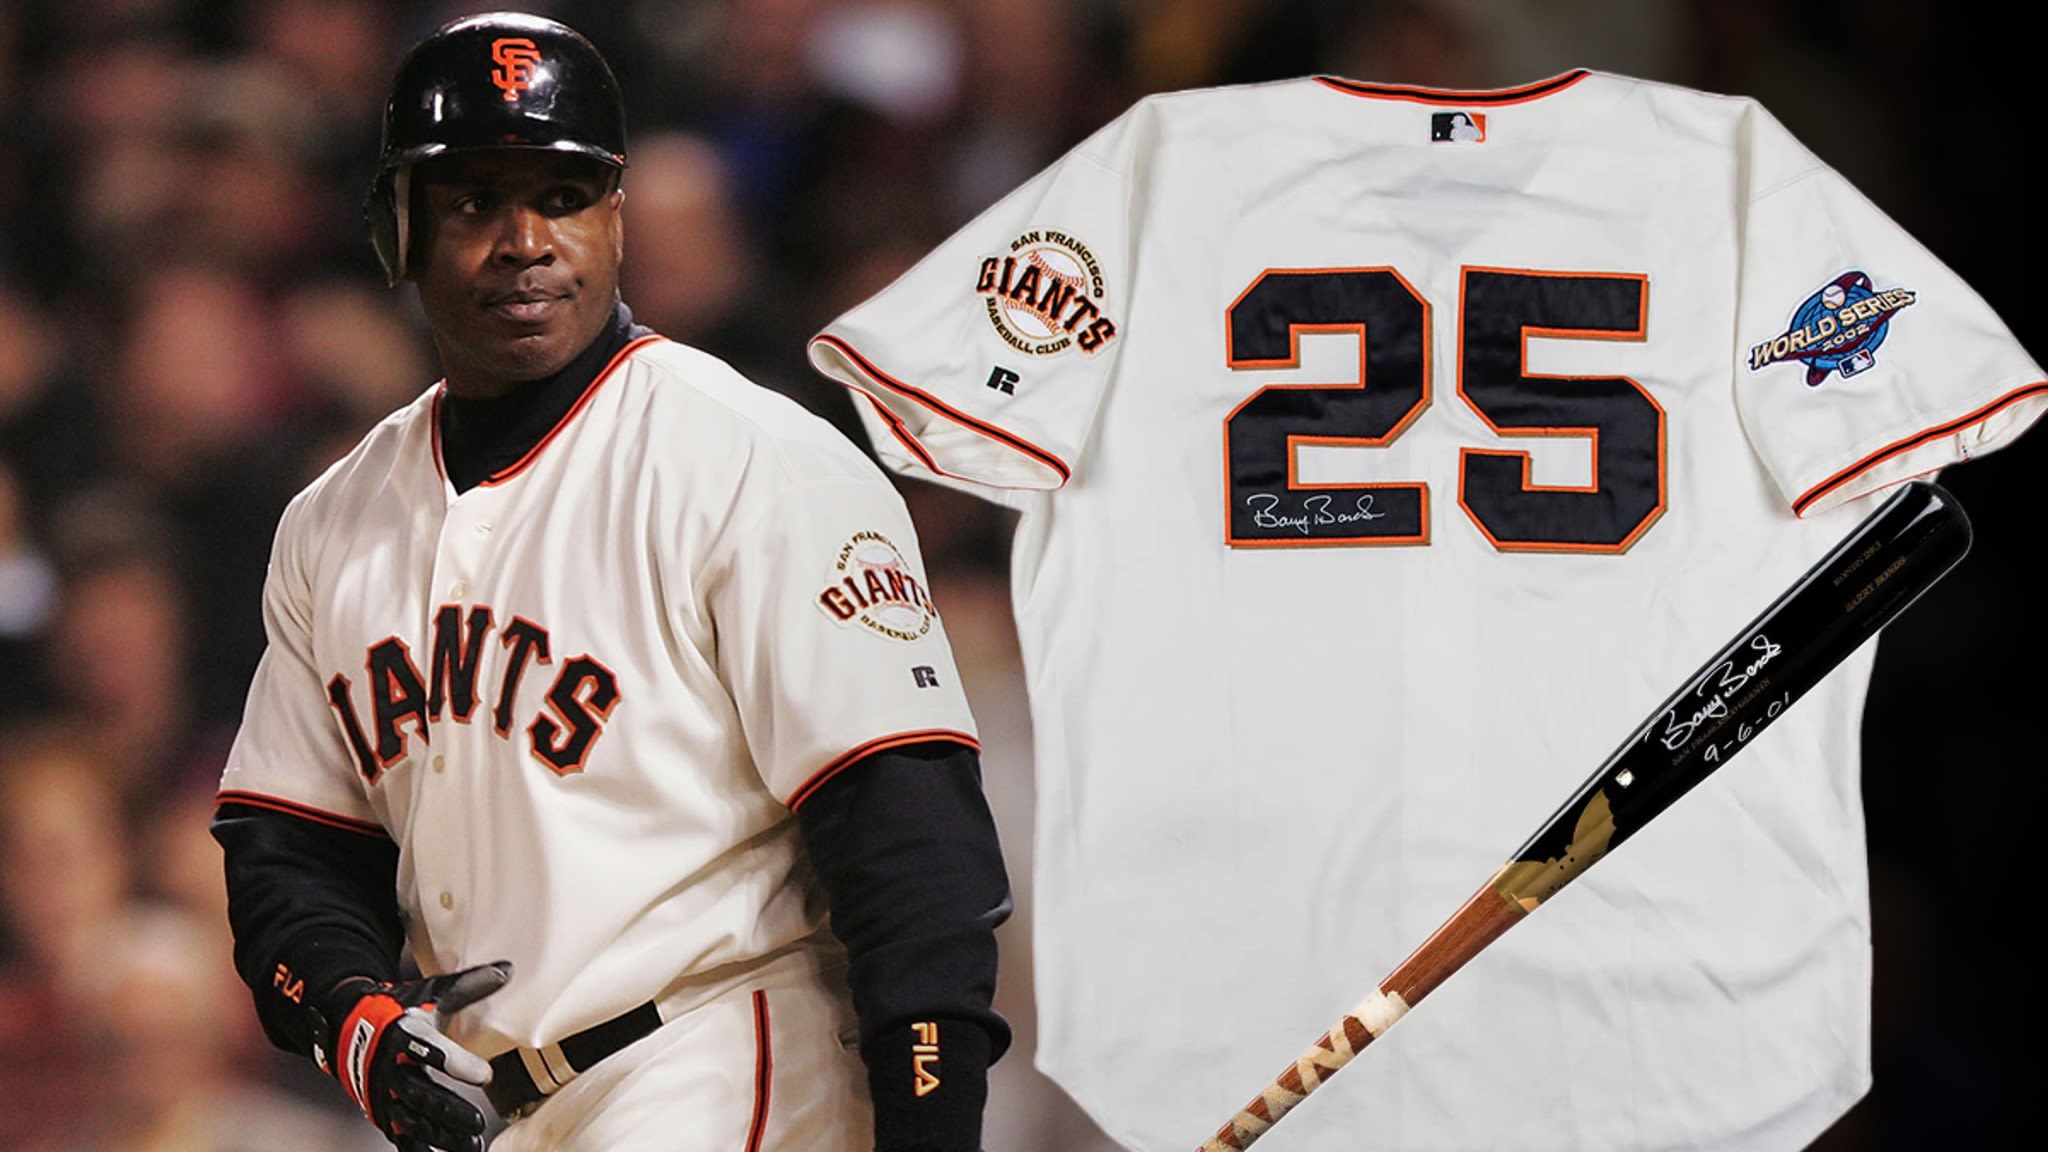 Barry Bonds' 2002 World Series Jersey, 60th HR Bat Sell For $245K At Auction